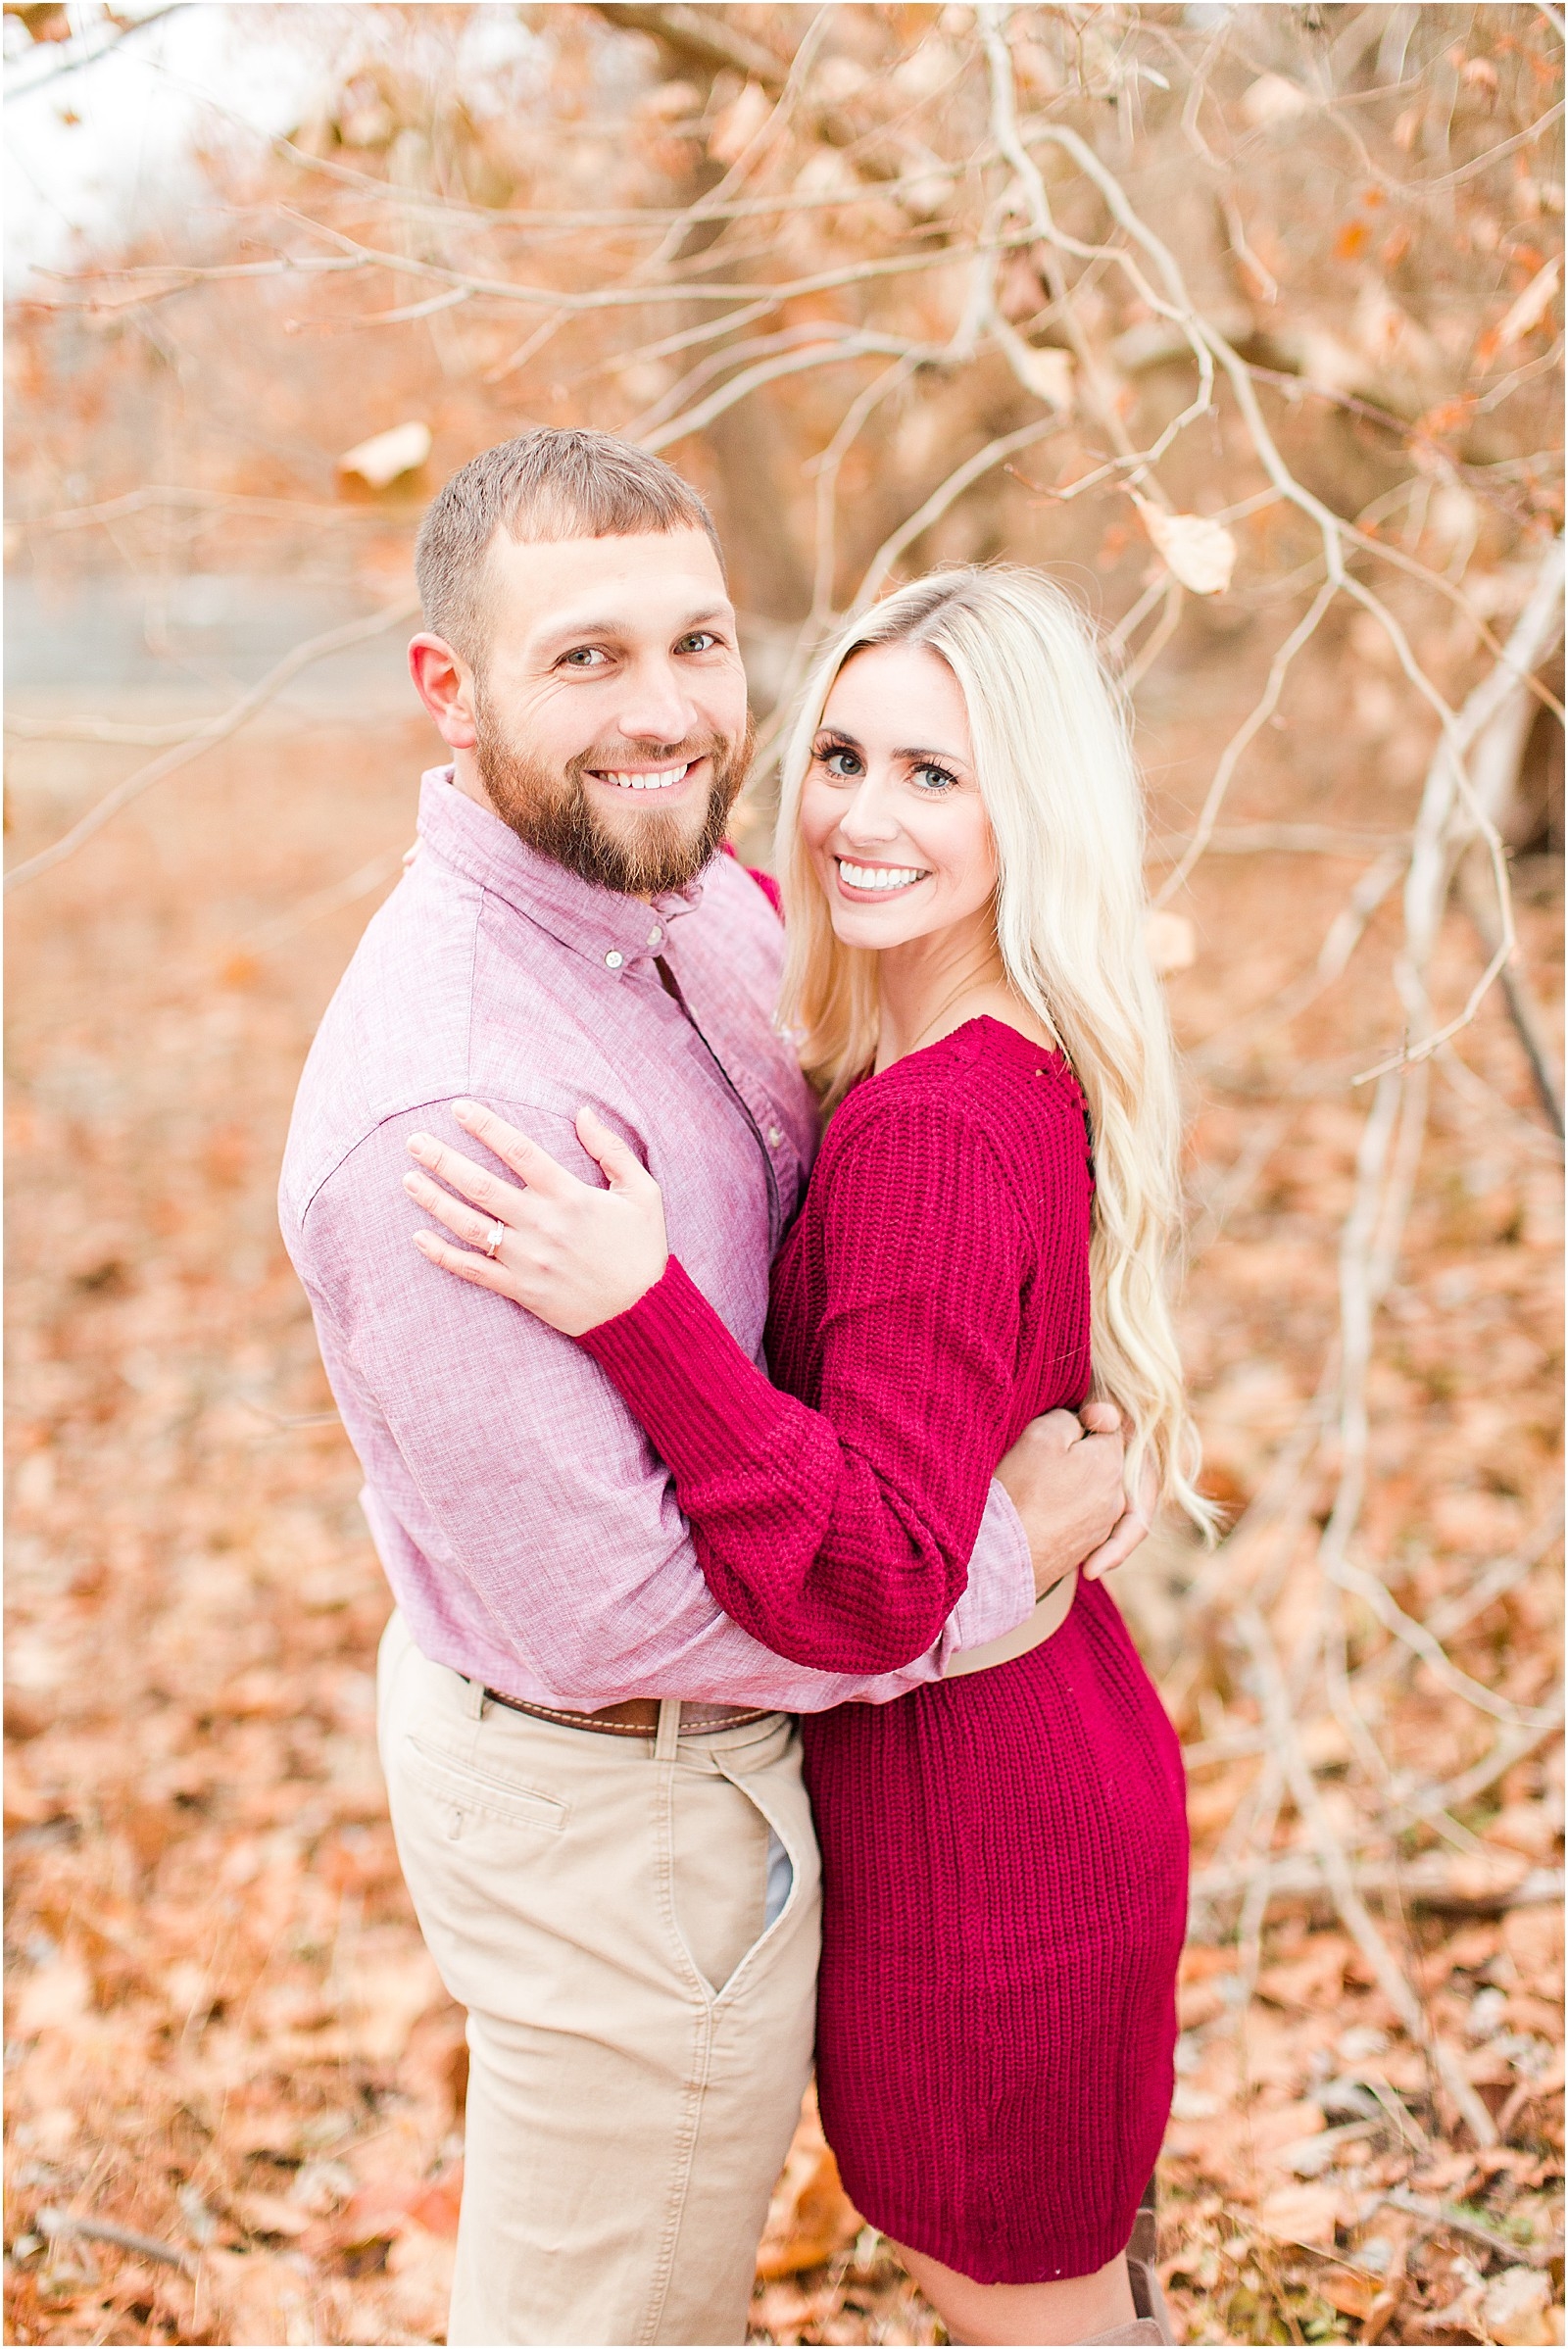 An sweet and snuggly fall anniversary session in Loogootee, Indiana. | #anniversarysession #fallsession #southernindianawedding | 020.jpg